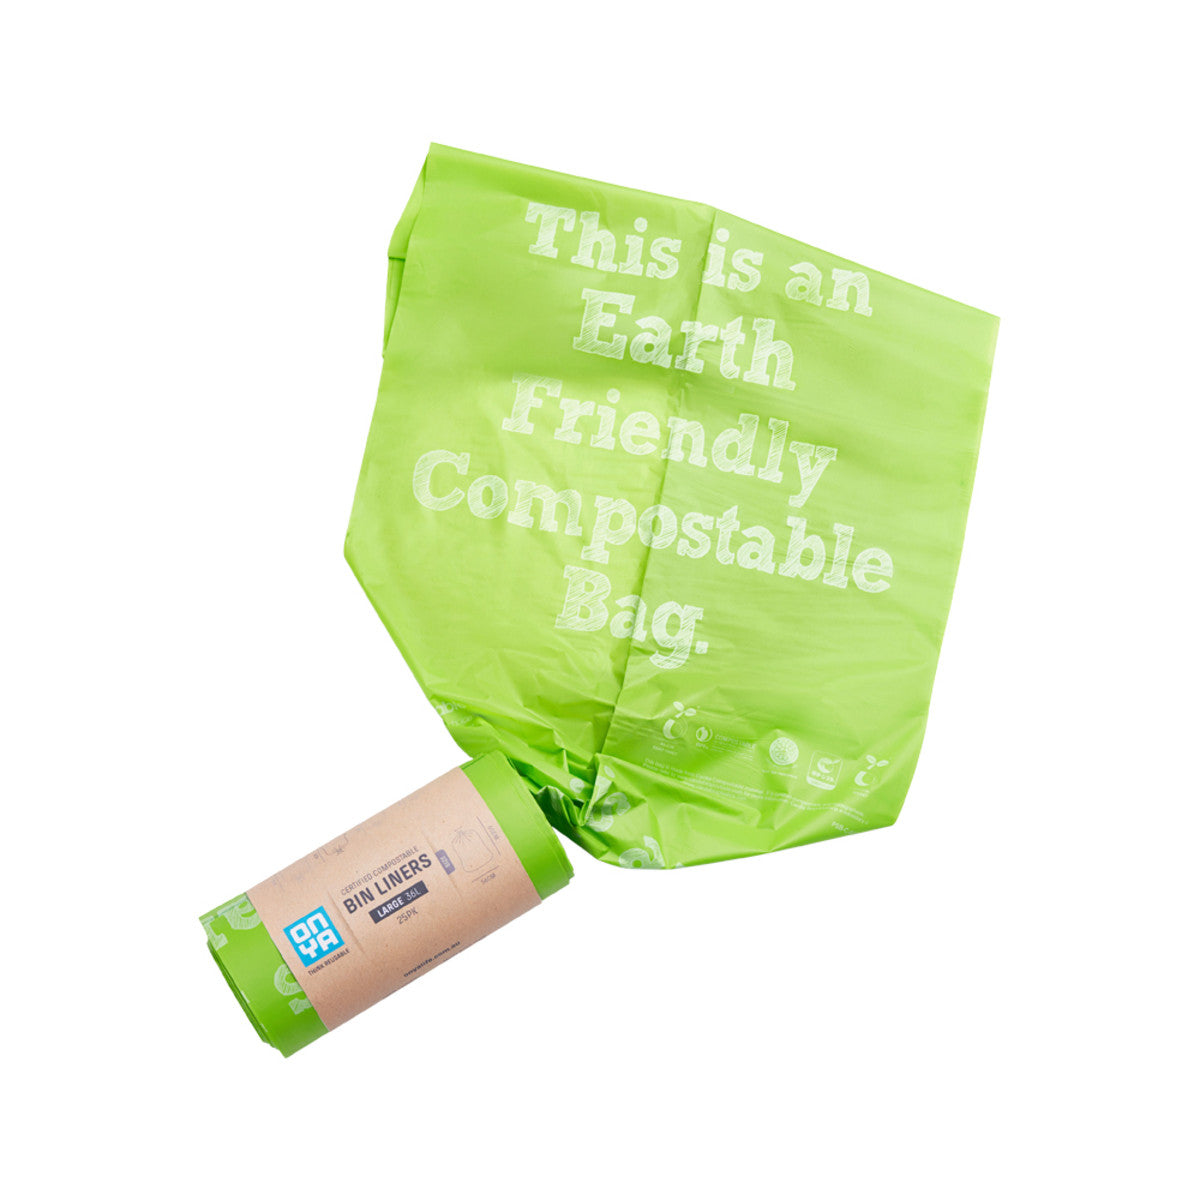 ONYA Compostable Bin Liners Large 36L x 25 Pack